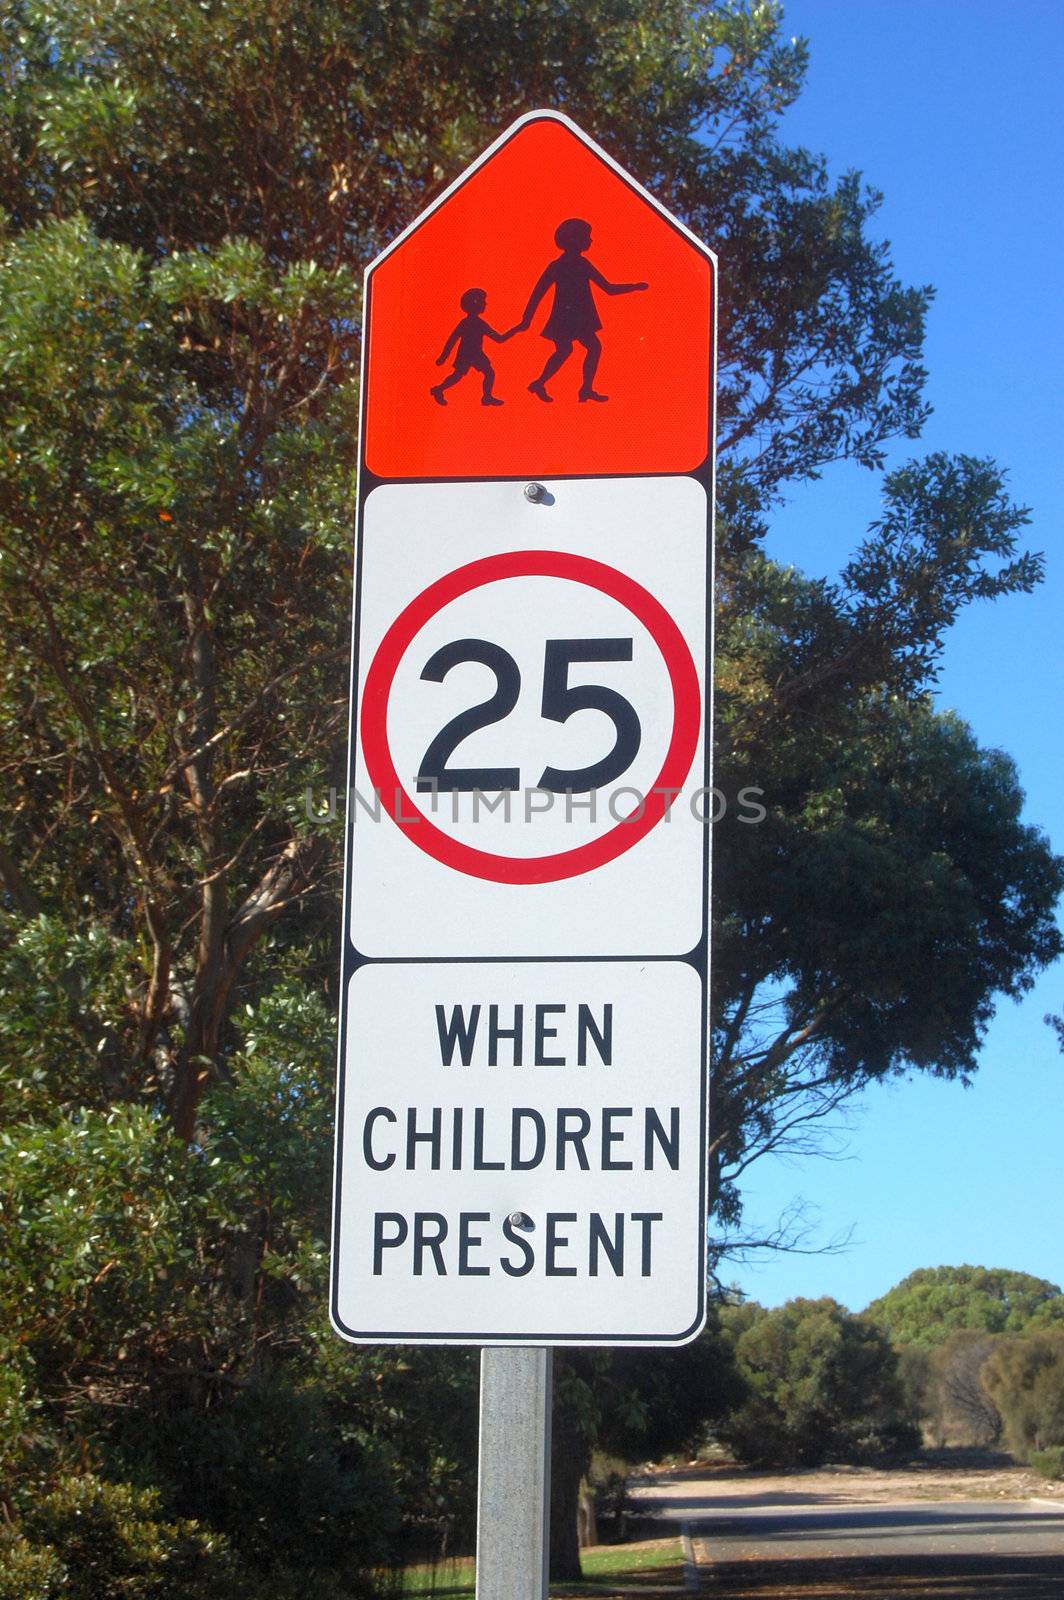 Road sign at the town, South Australia